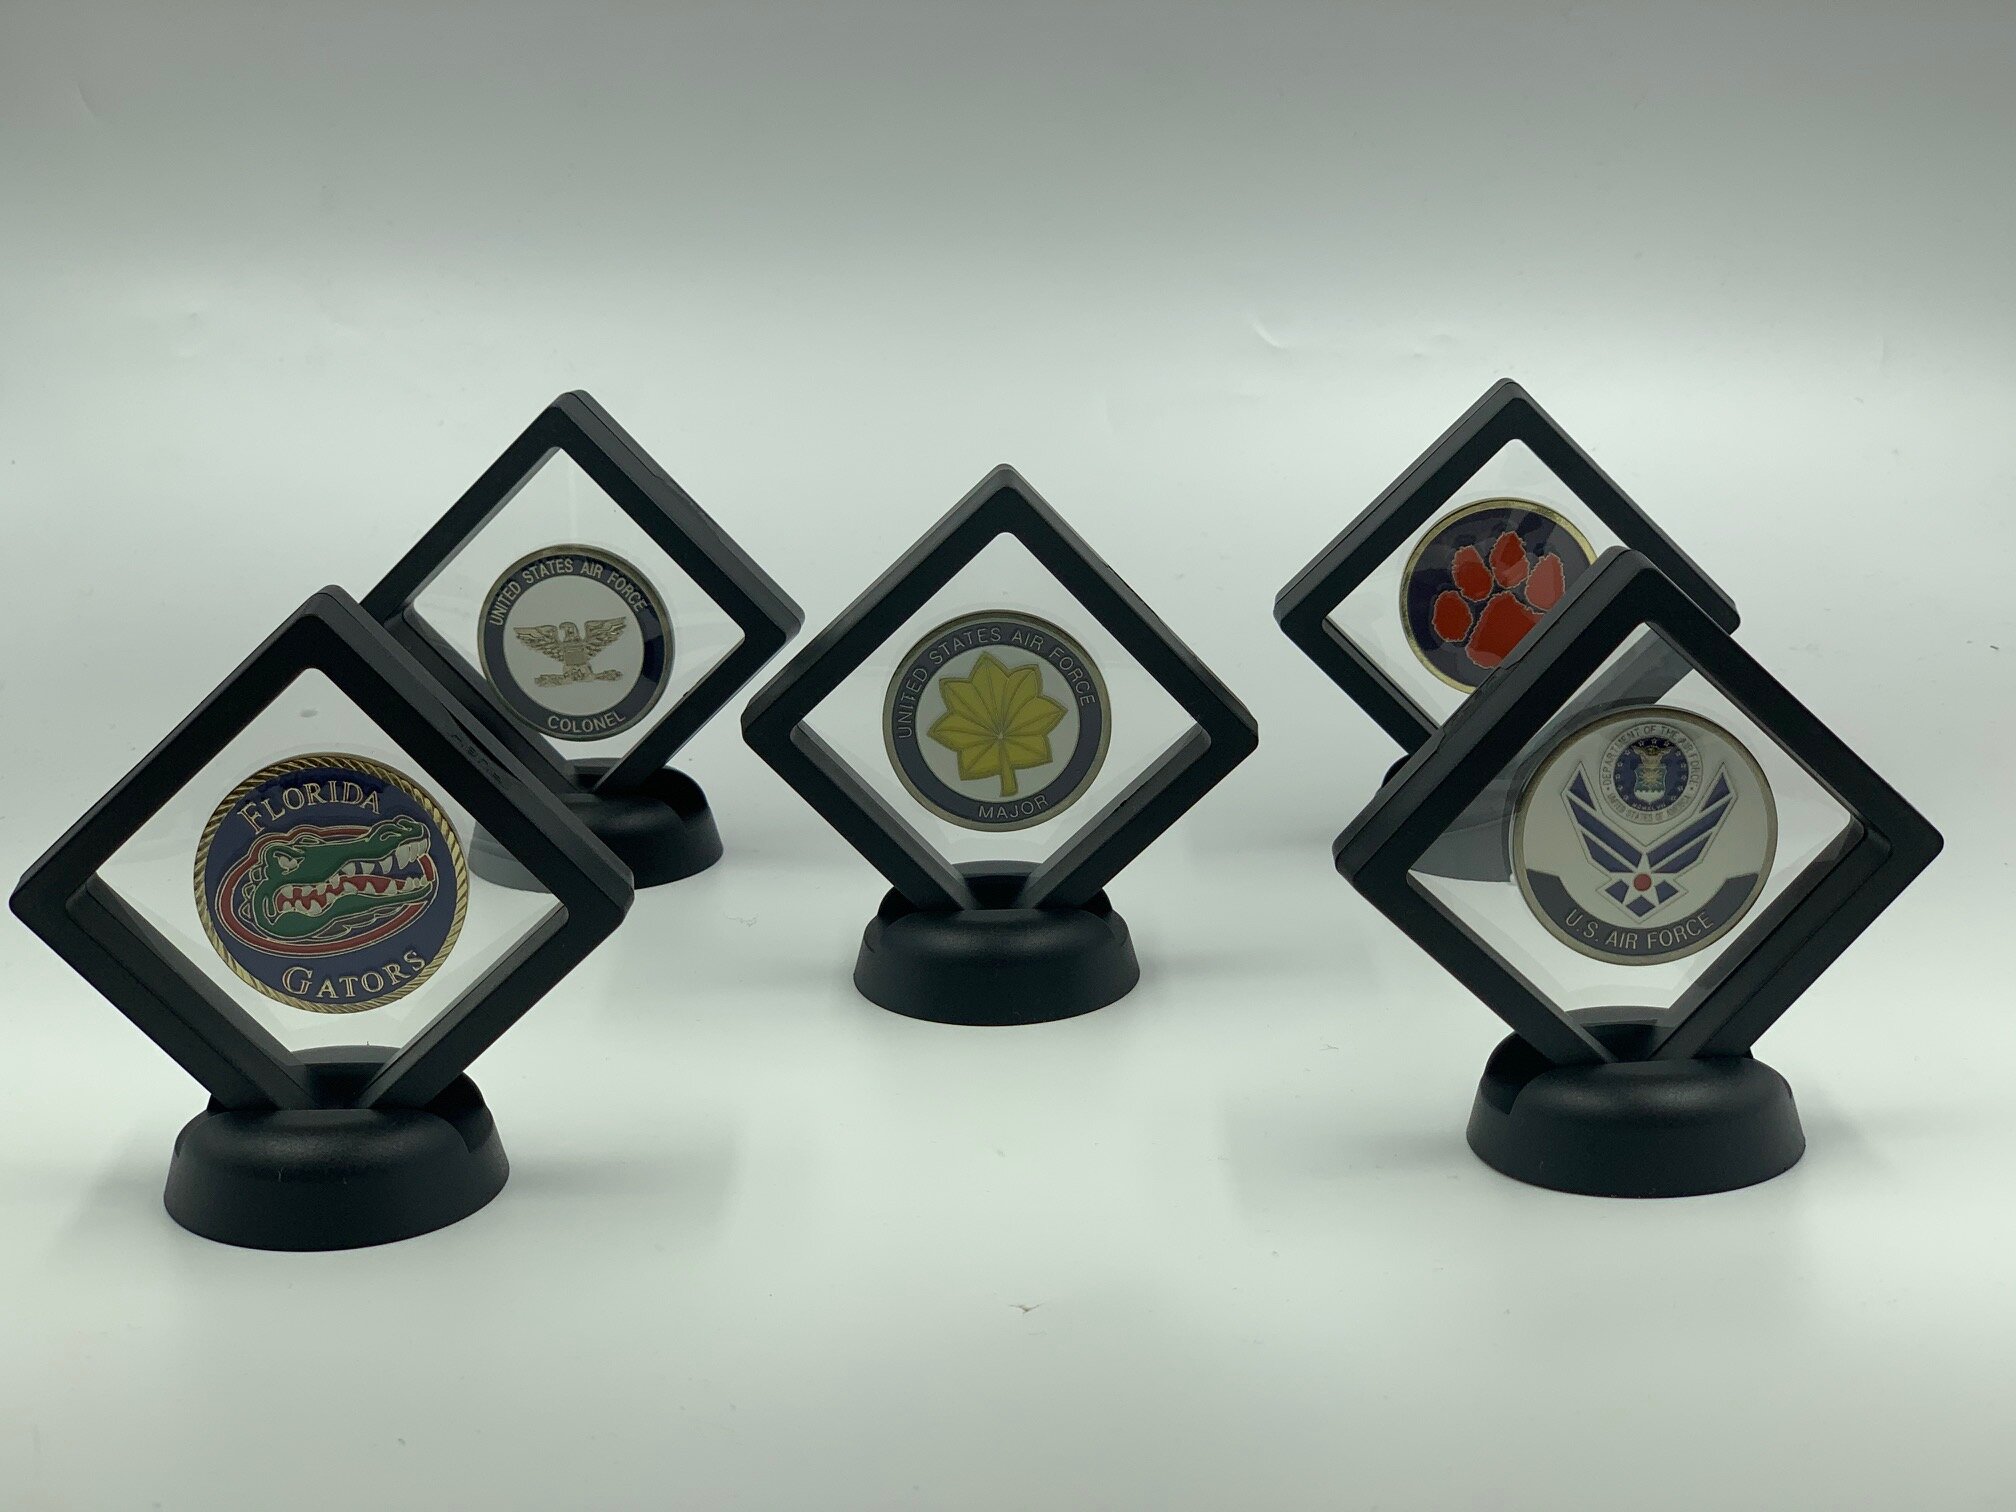 Set of 10 3D Floating Frame Display Holder with Stands for Challenge Coins Jewelry AA Medallions 10, Black 2.75 x 2.75 x 0.75 Inches DECOMIL Coin Display Stand 